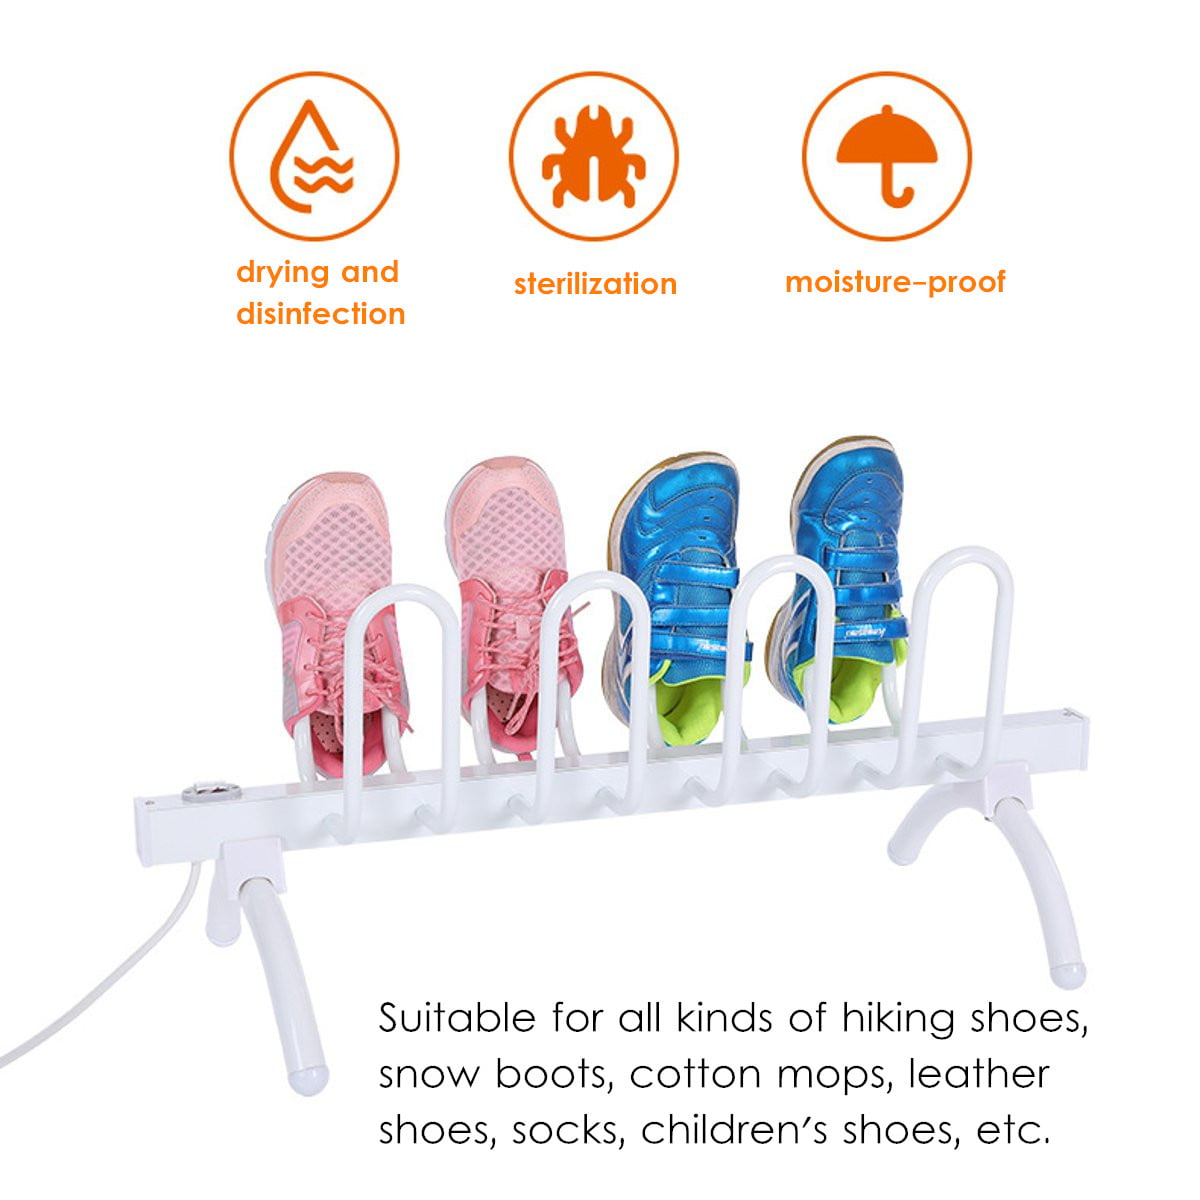 Socks Folding Design and Quick Drying for Shoes EEUK Shoes Boots Dryer Electric Foot Warmer Ski Boots Gloves with Heat Blower Portable Adjustable Rack and Timer Hats 